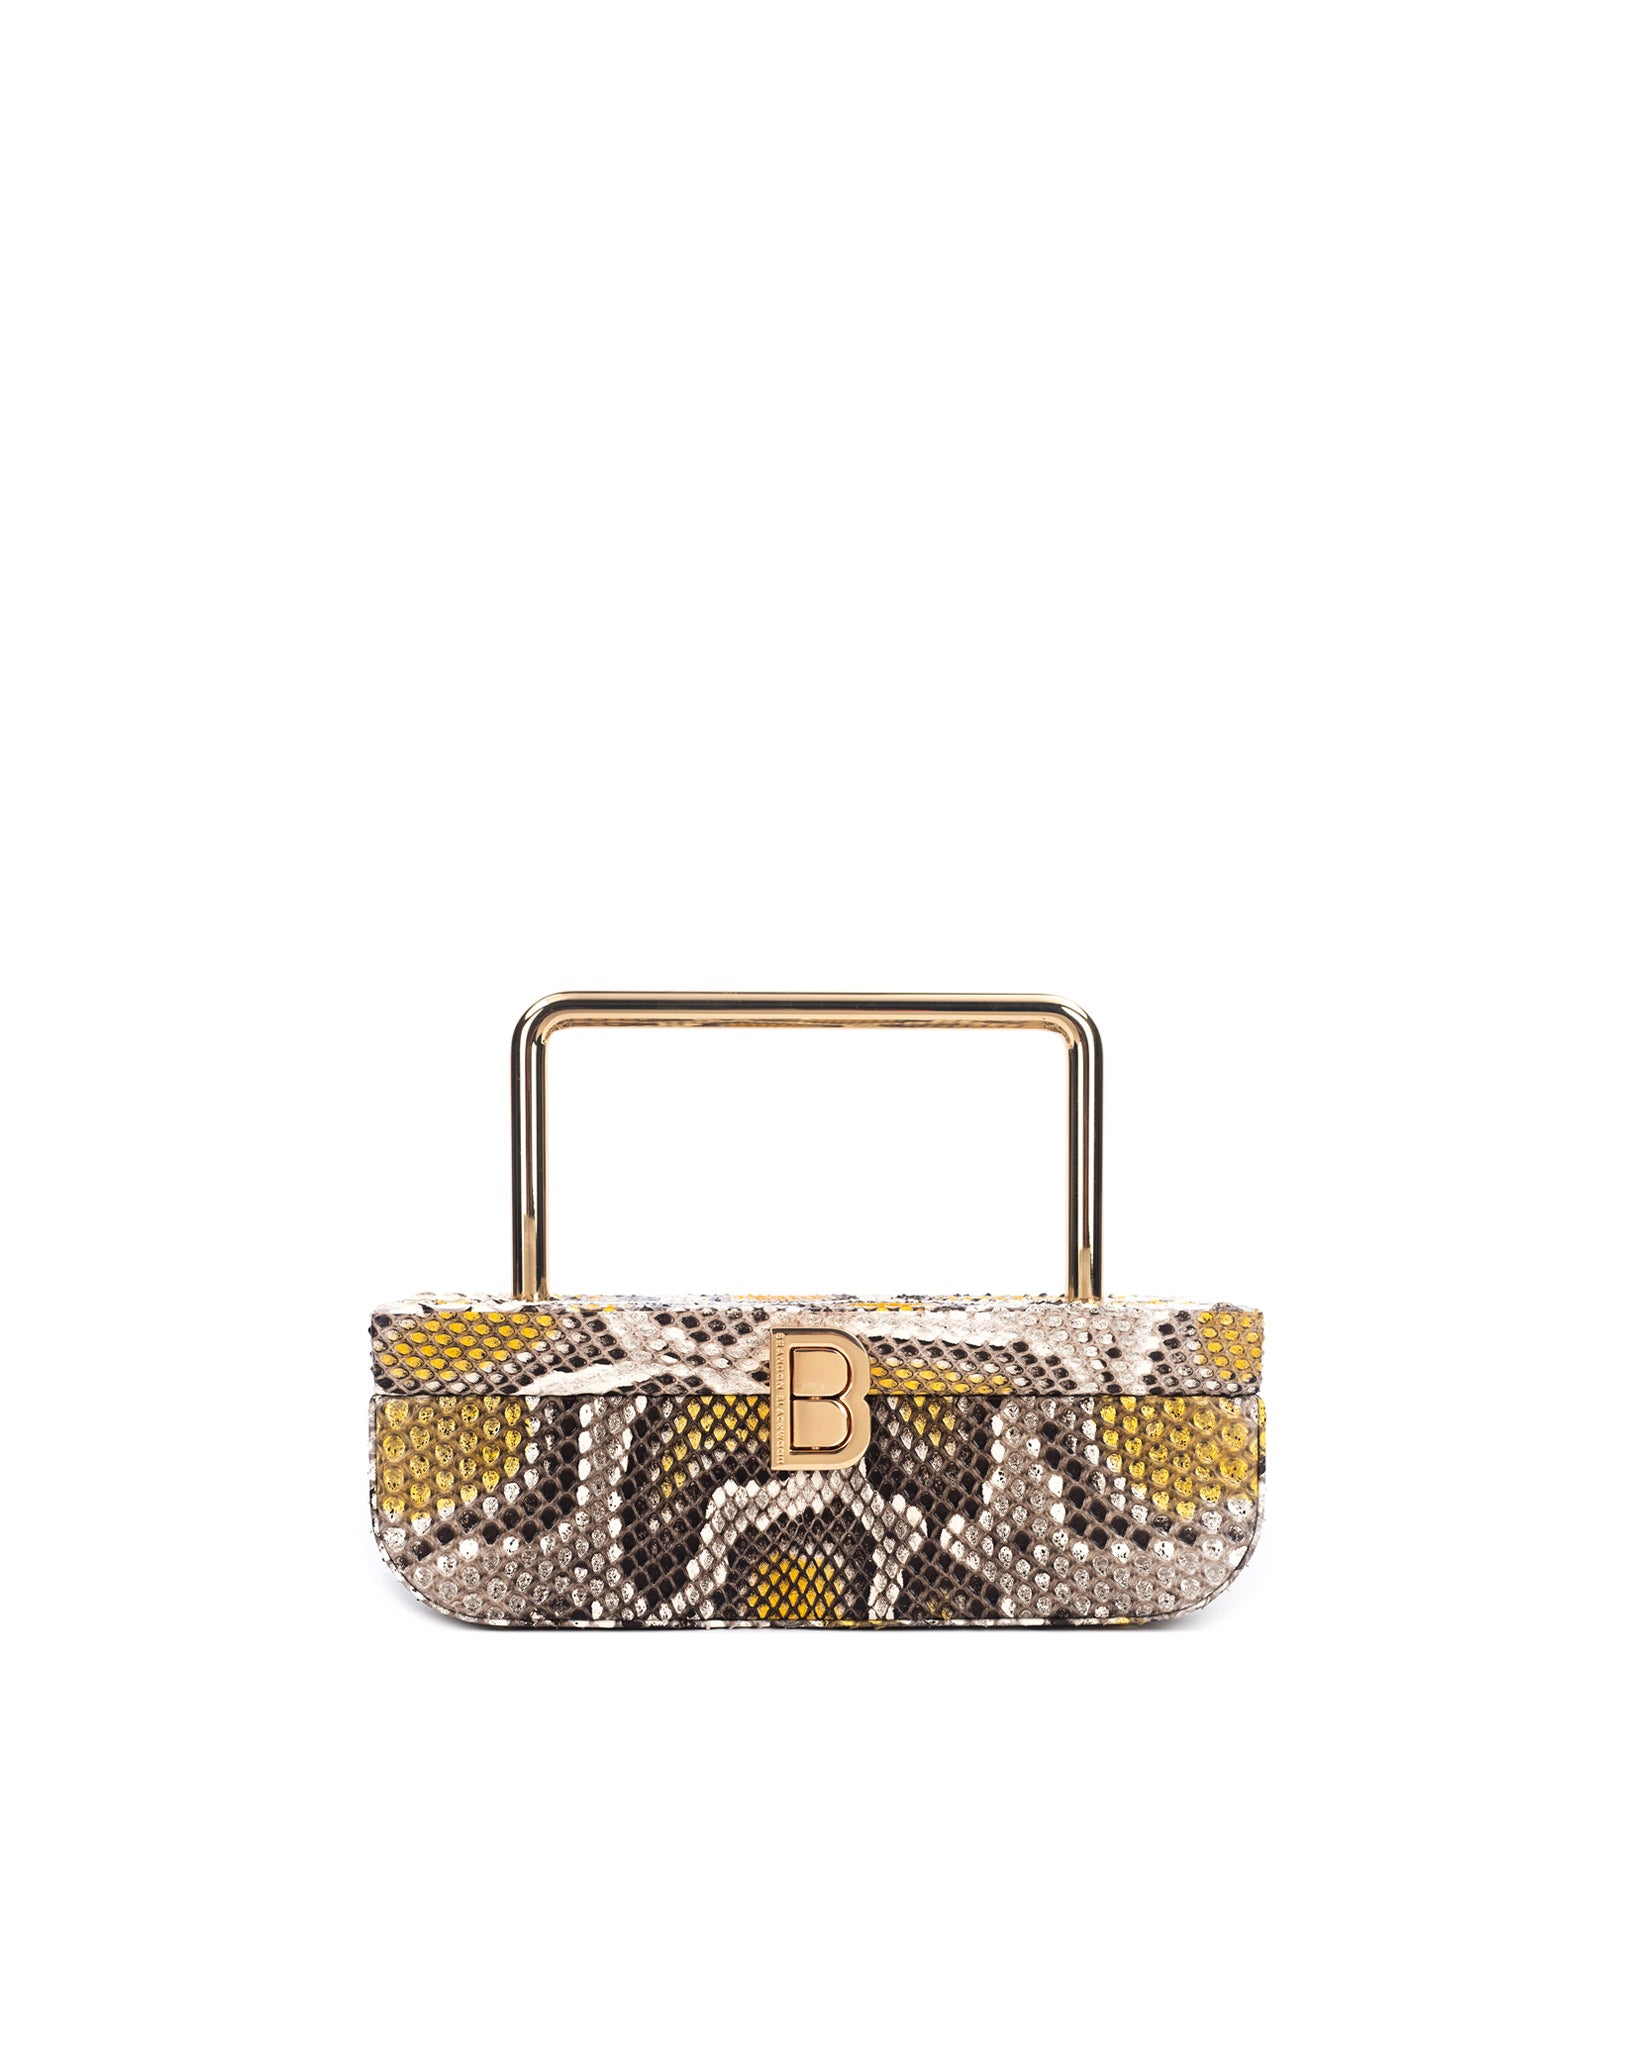 Louis Vuitton Python Bag Reference Guide - Spotted Fashion